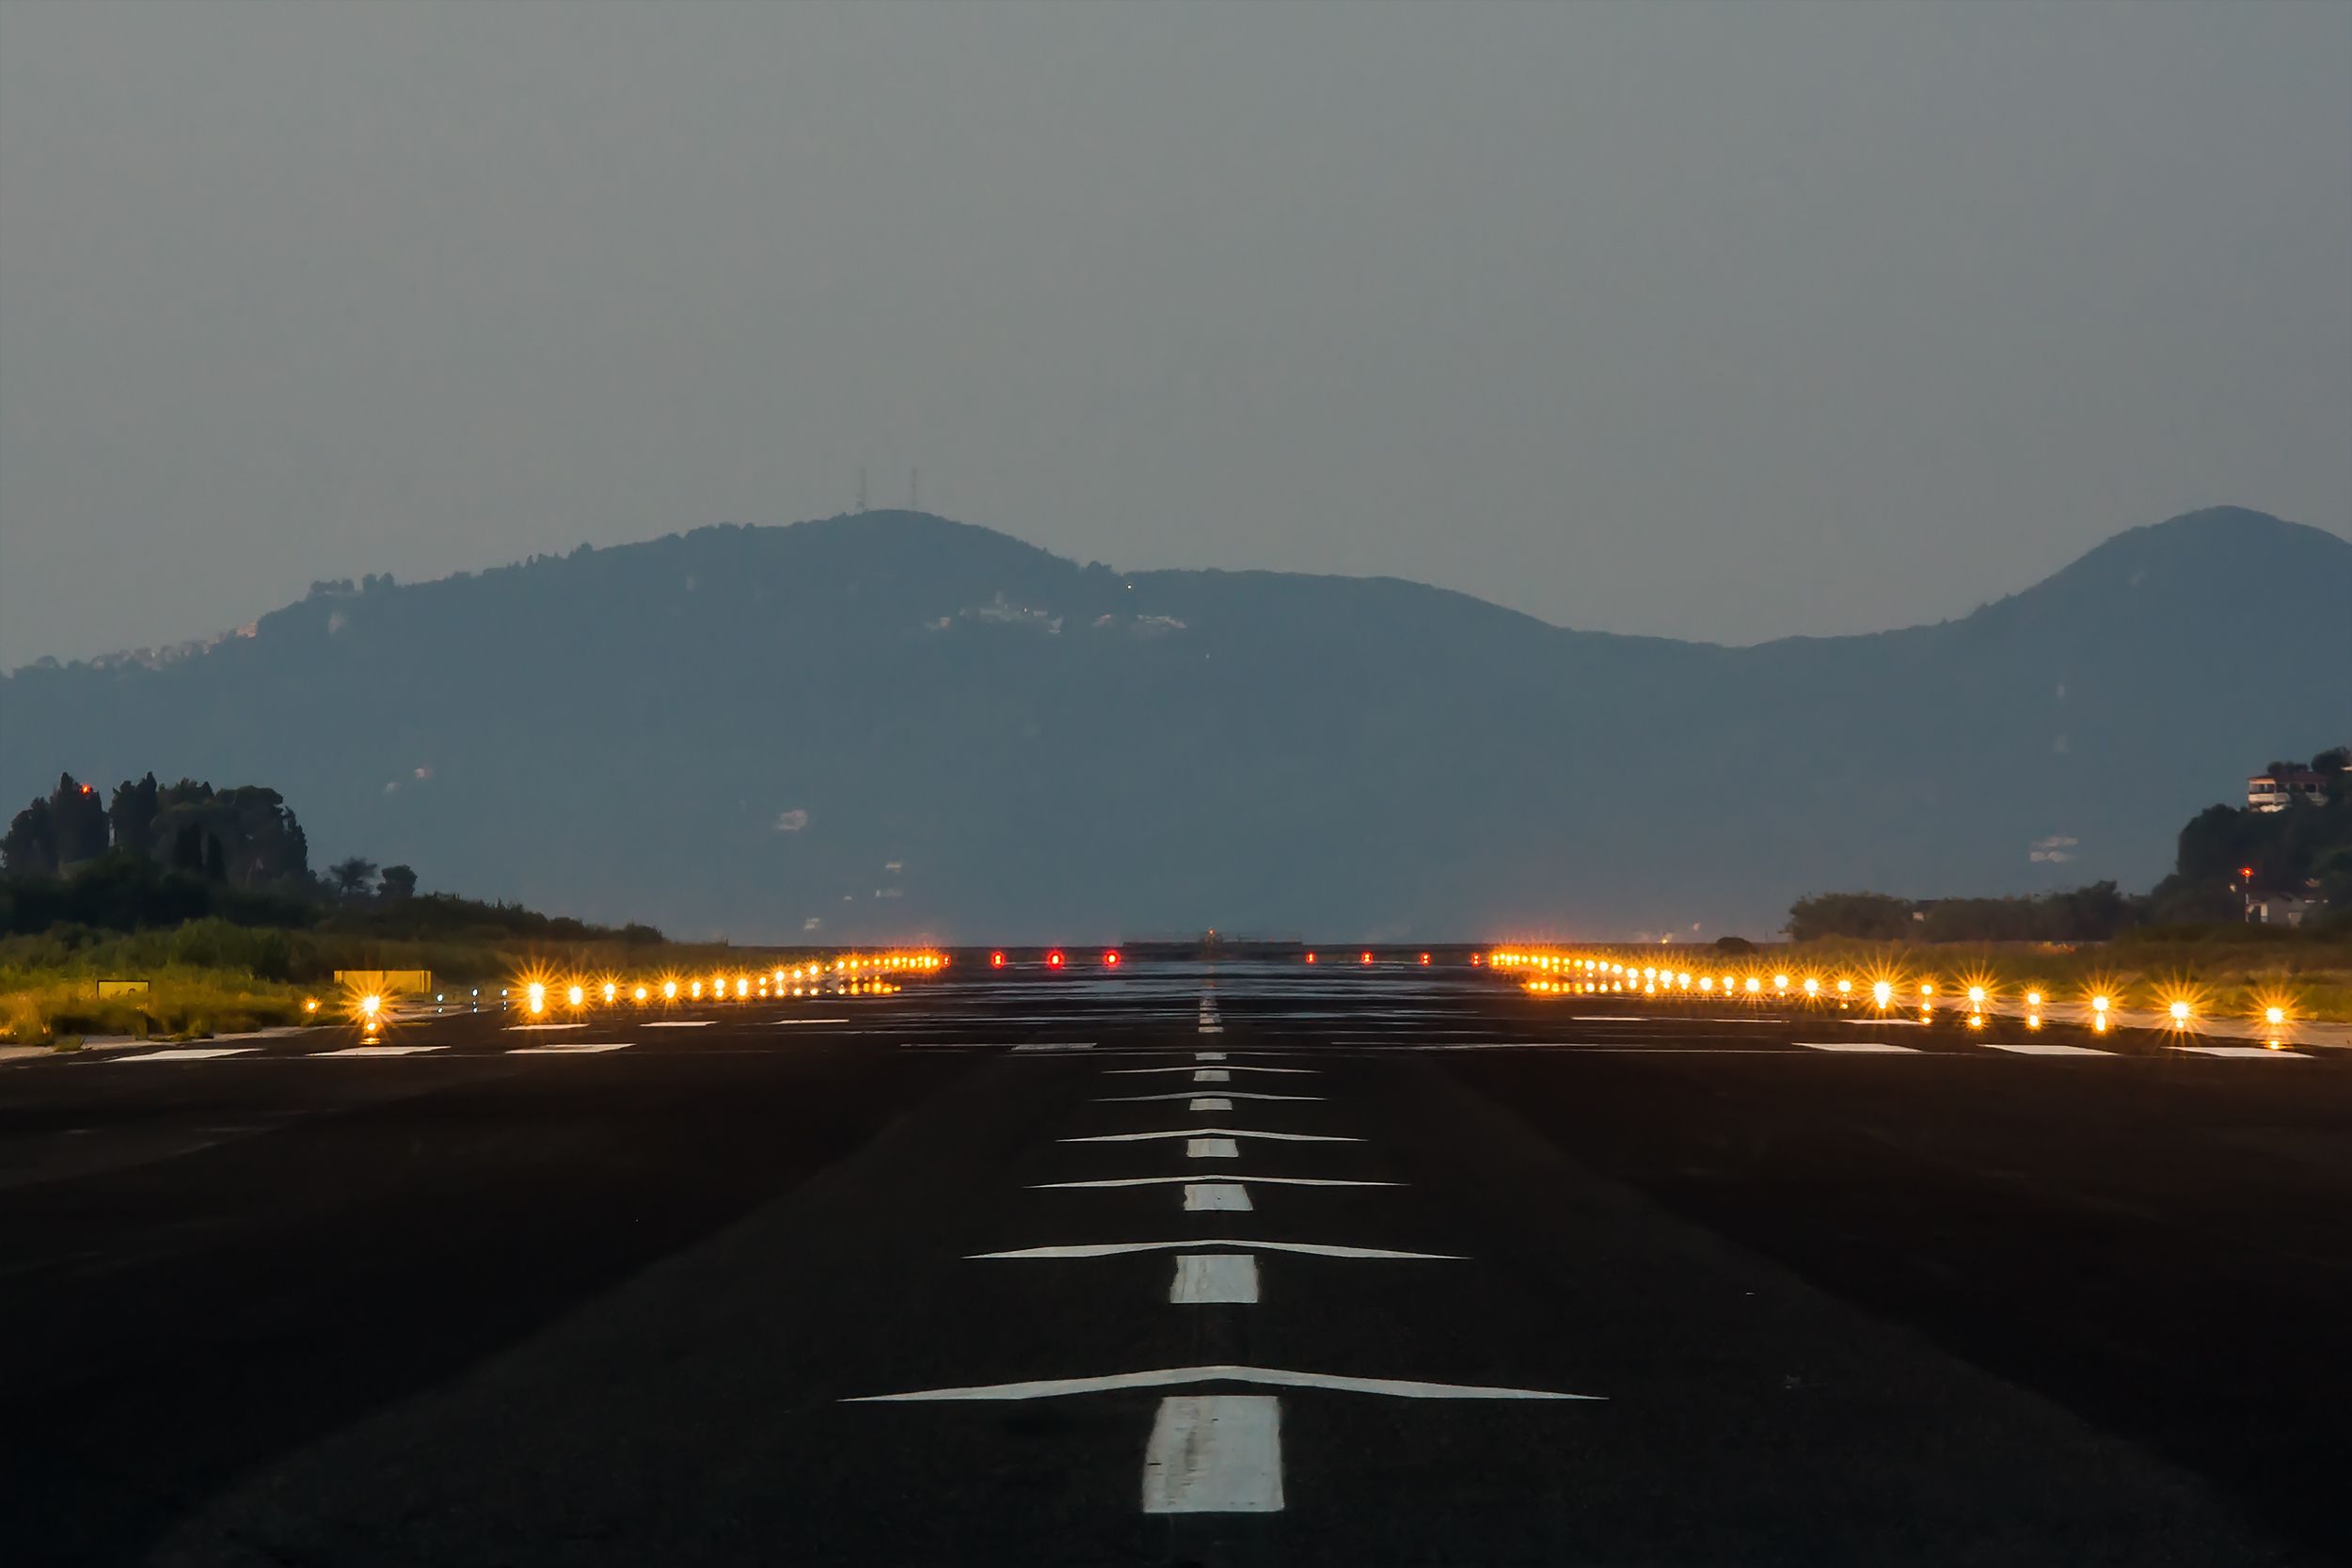 A ground-level view of a short runway with mountains in the background.